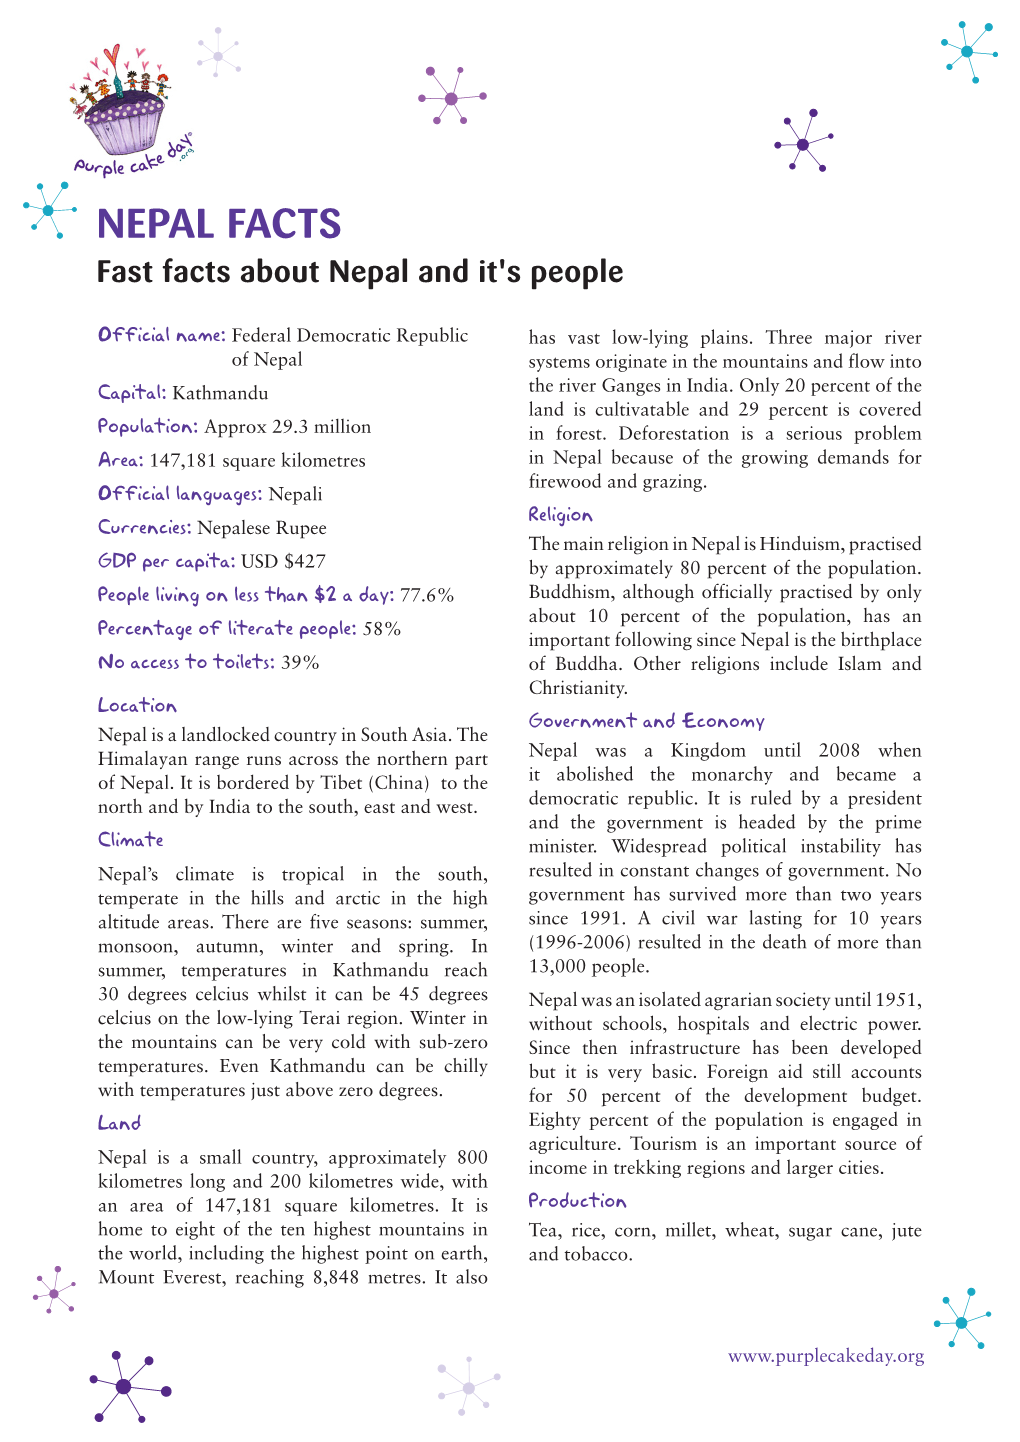 NEPAL FACTS Fast Facts About Nepal and It's People